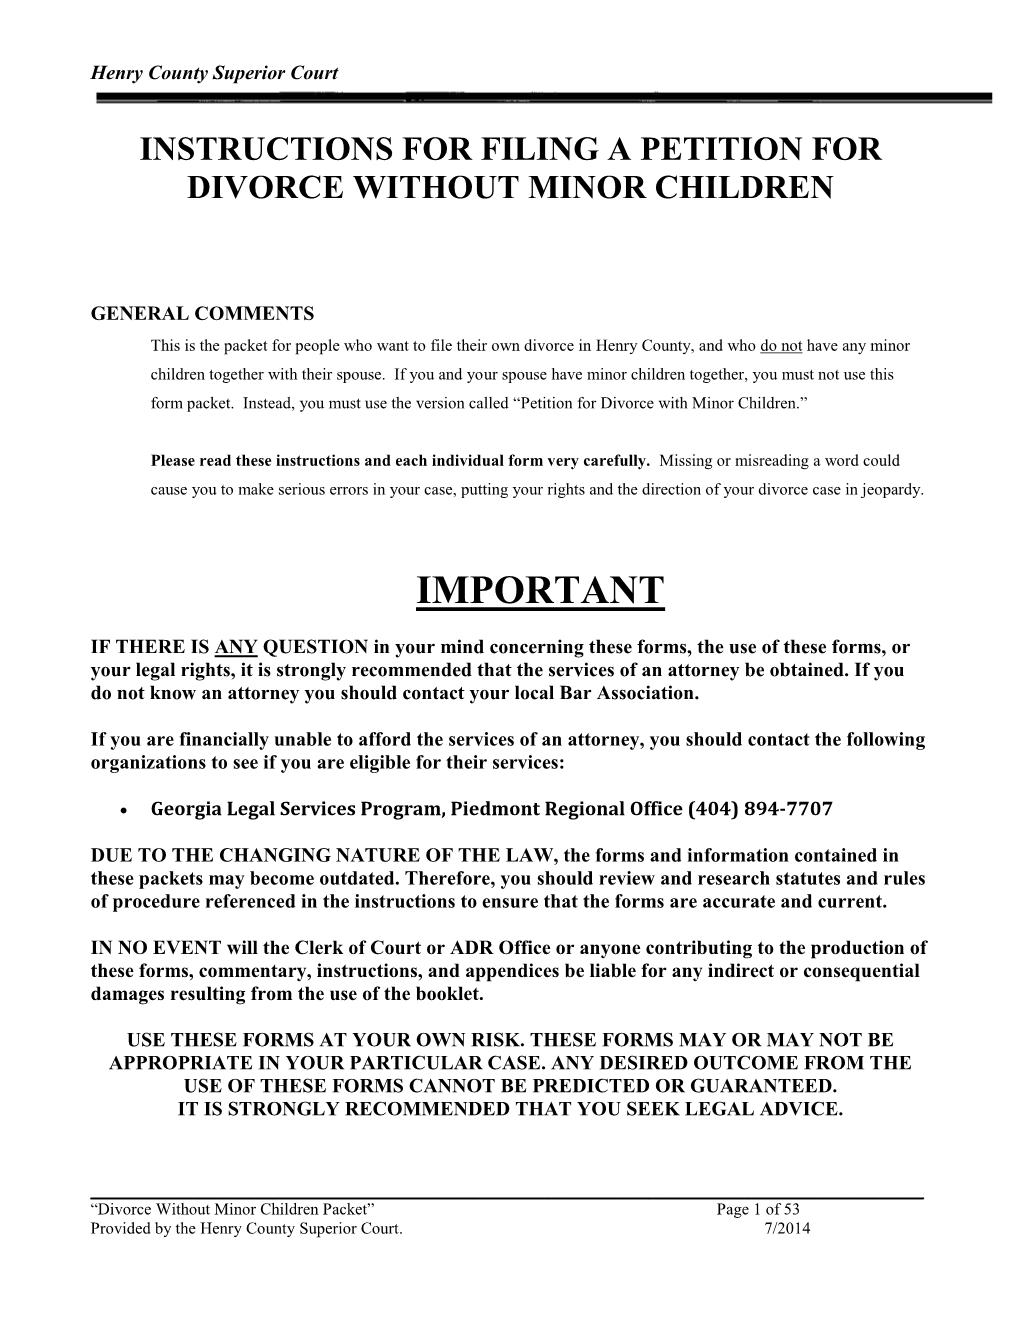 Instructions for Filing a Complaint for Divorce Without Minor Children